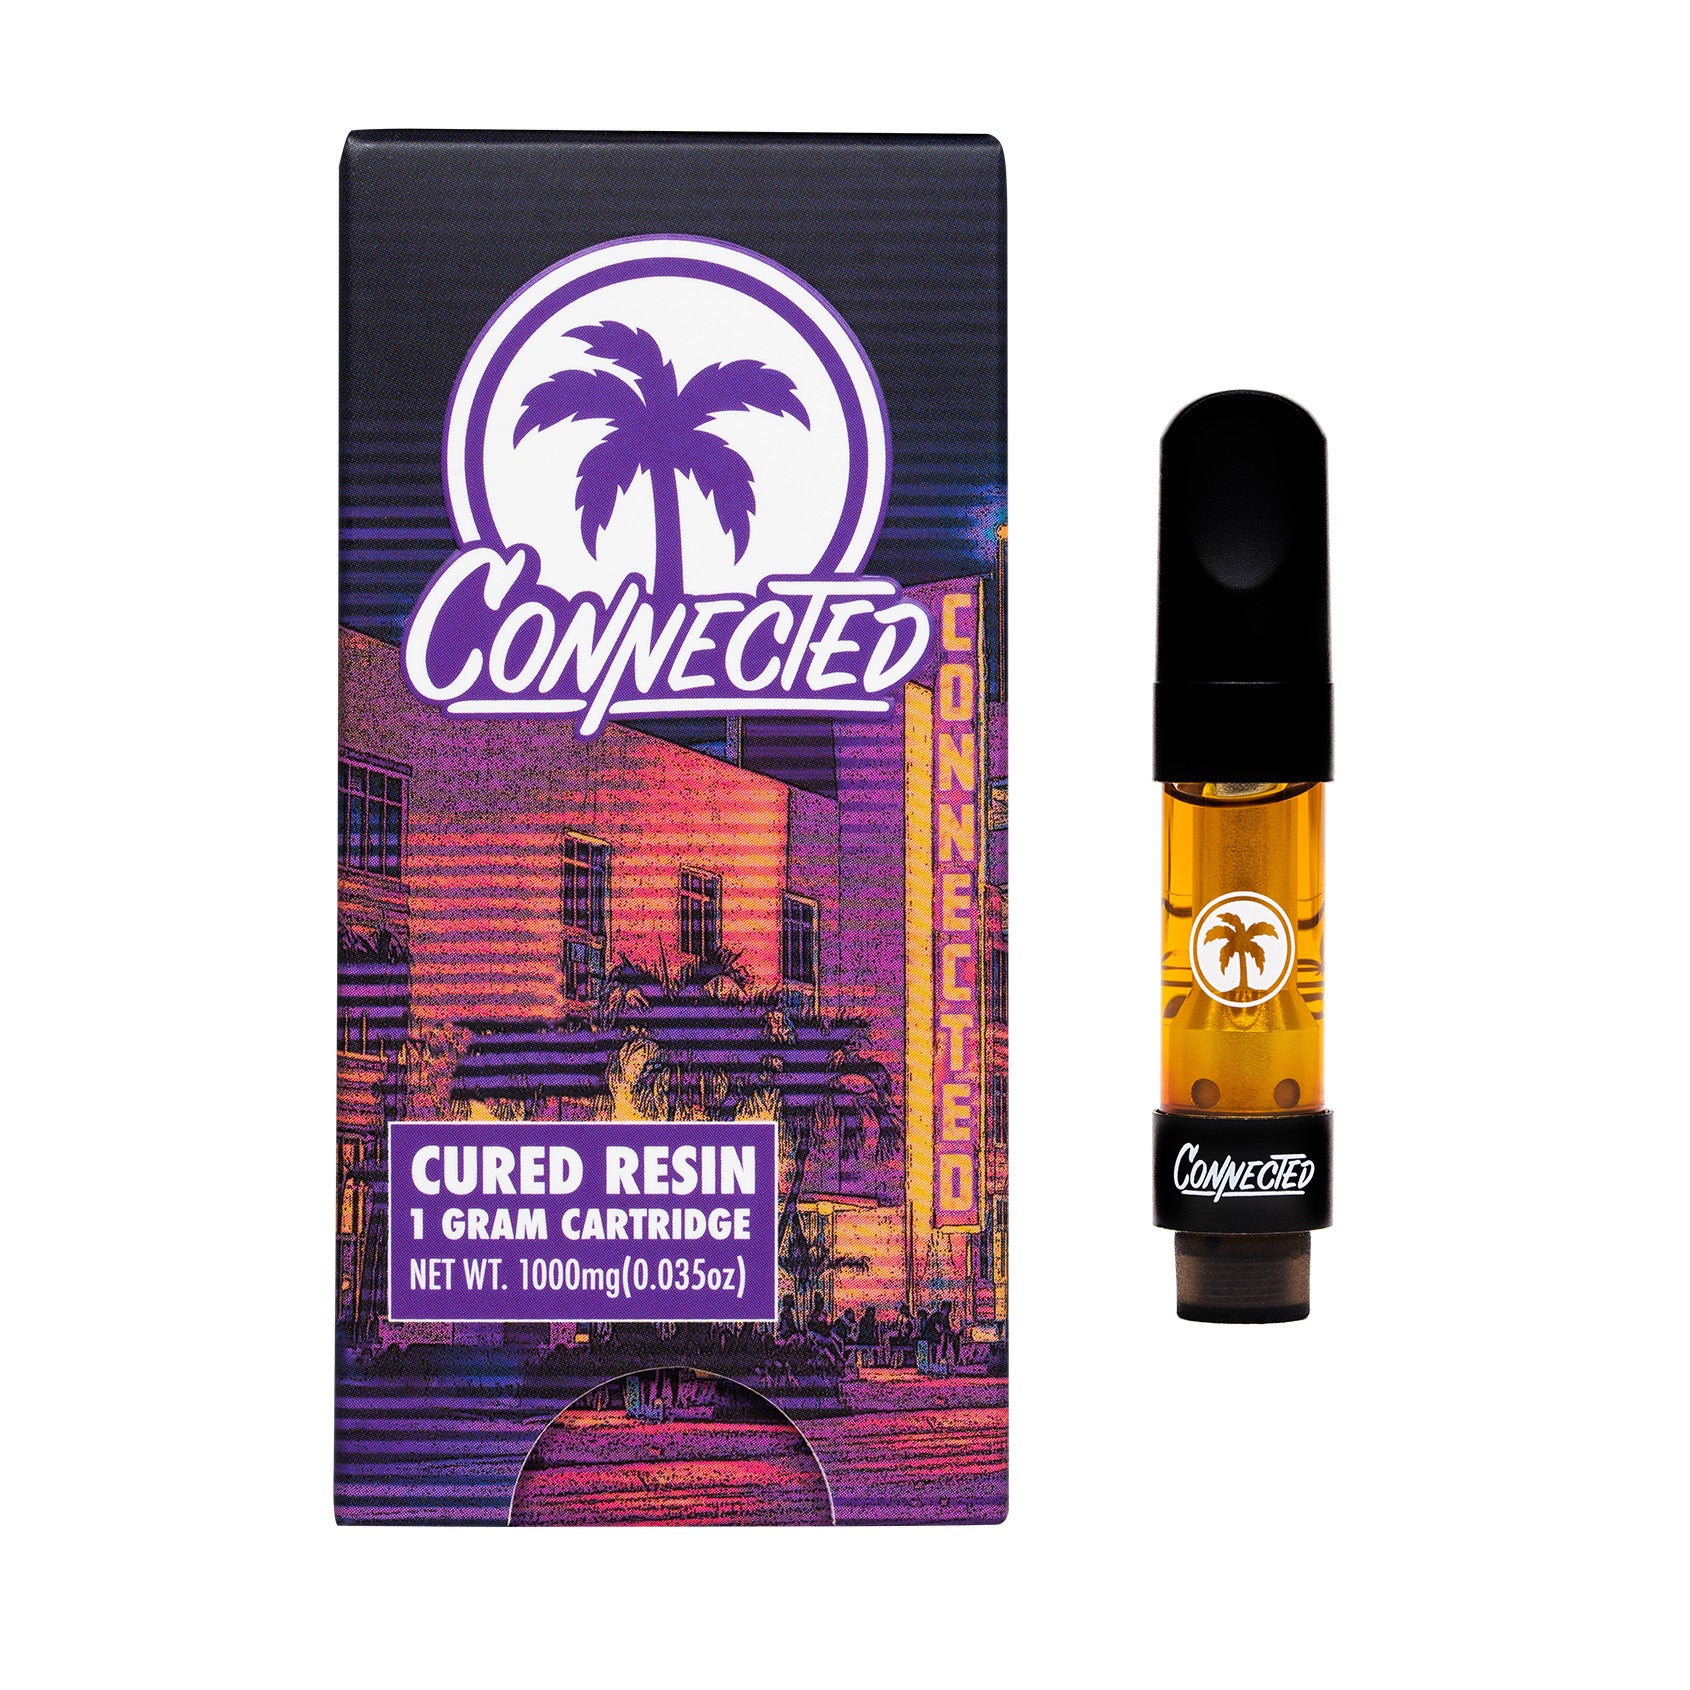 Wipeout Cured Resin Cartridge (1G)